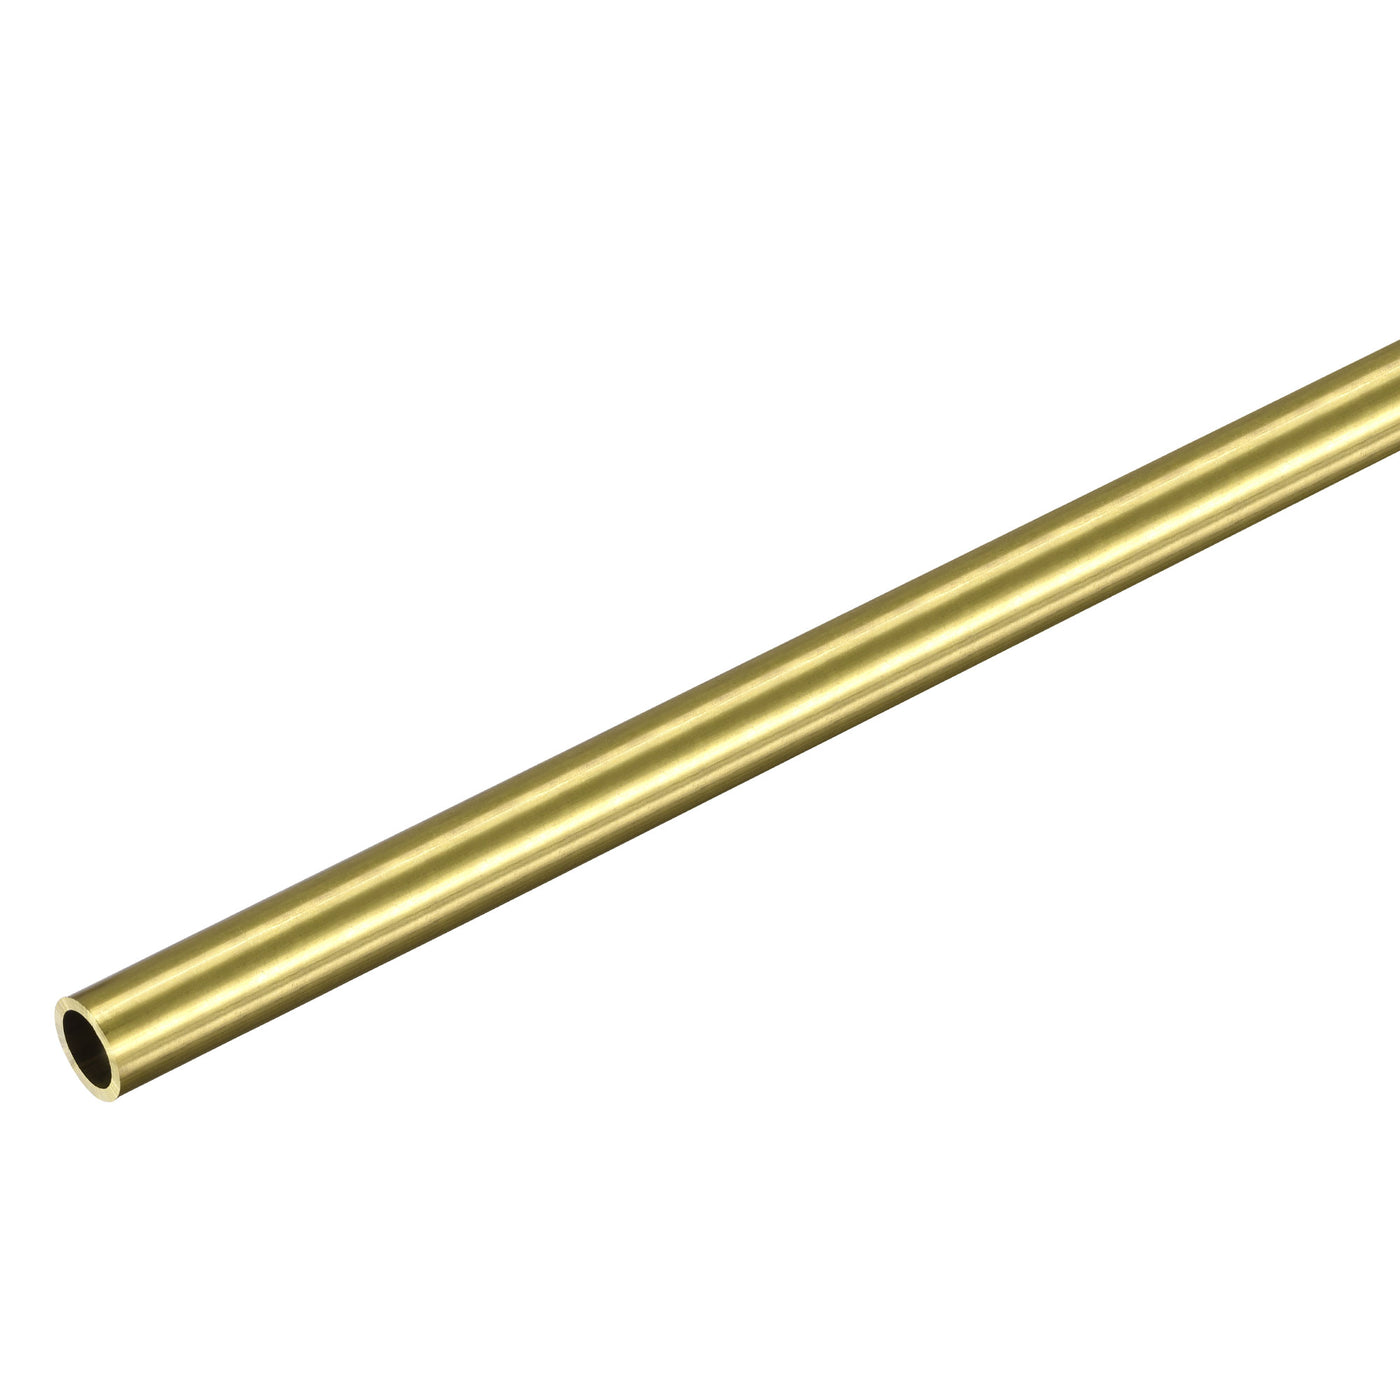 uxcell Uxcell 6mm x 1mm x 400mm Seamless Straight Brass Tube for Industry DIY Projects